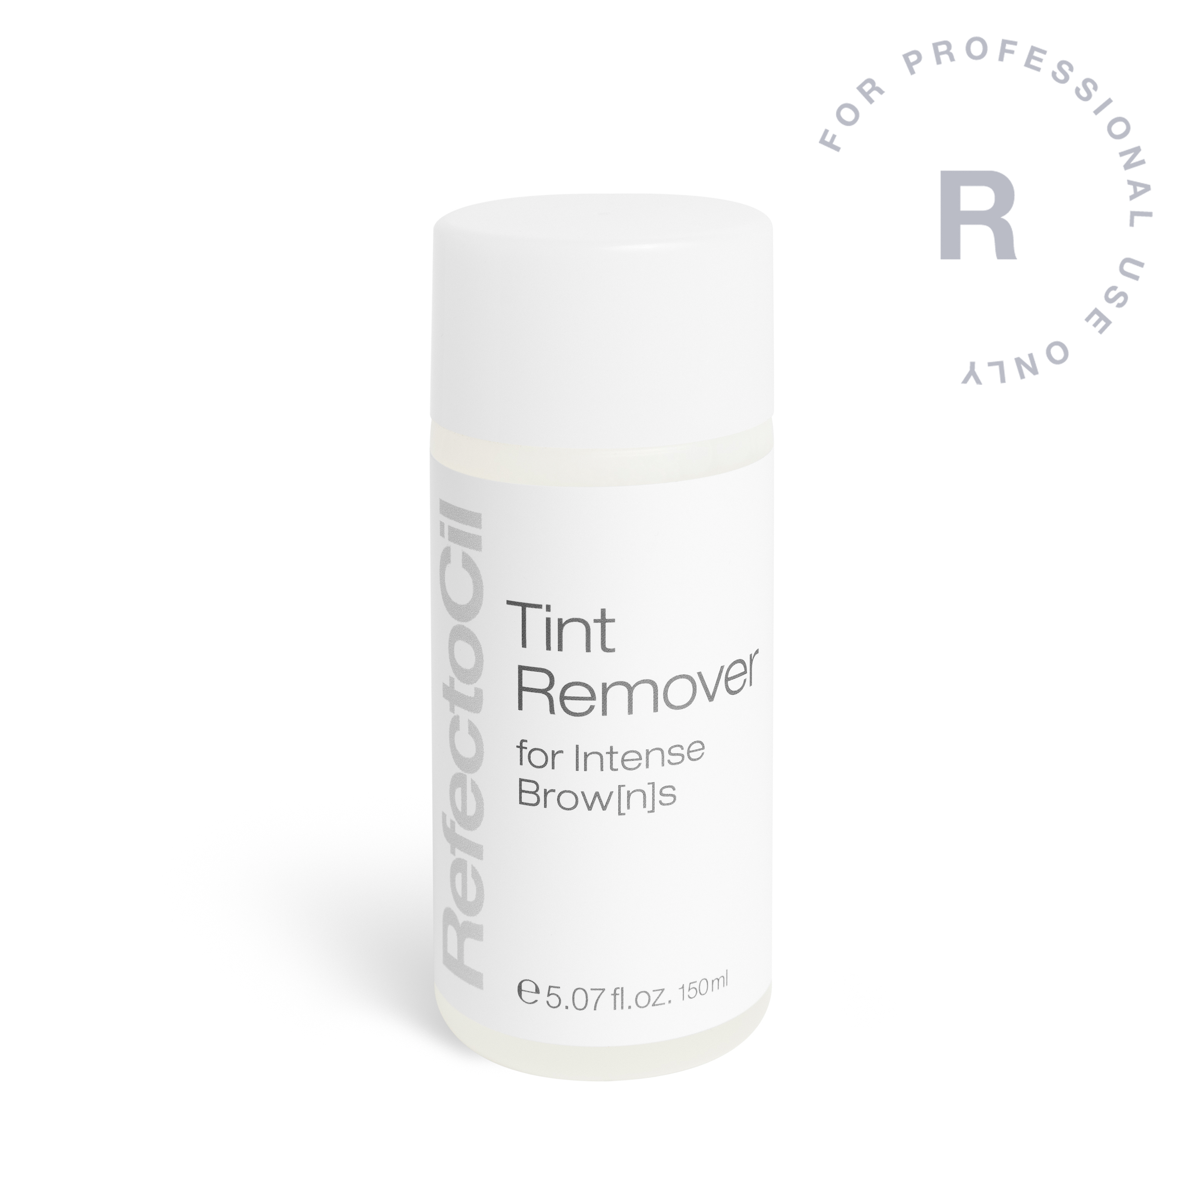 Tint Remover for Intense Brow[n]s